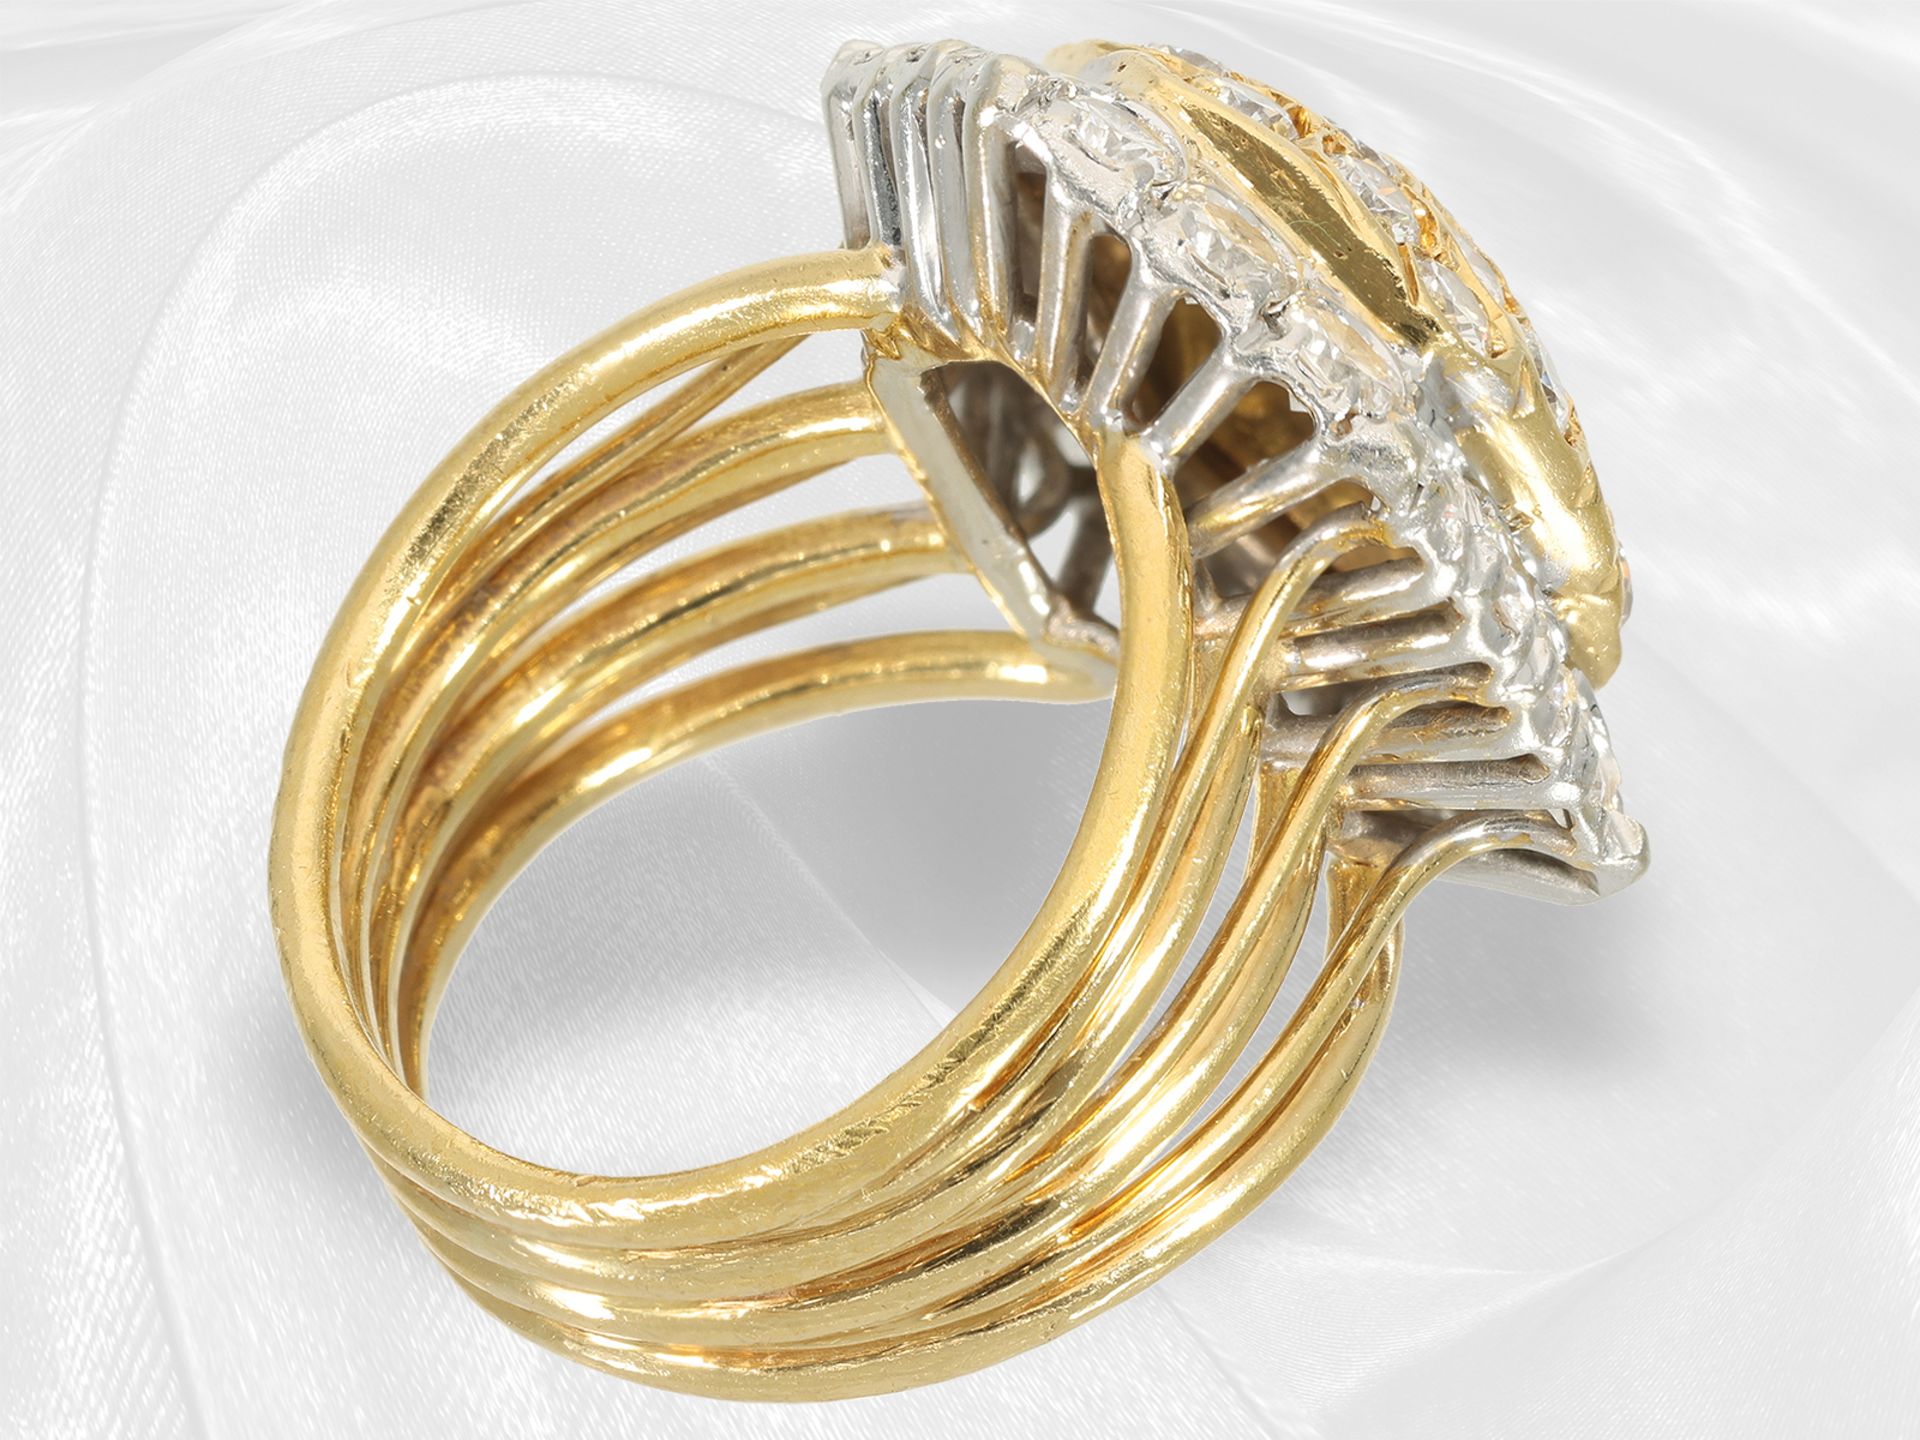 Earclips/ring: extremely luxurious vintage goldsmith's jewellery, finest brilliant-cut diamonds of a - Image 5 of 8